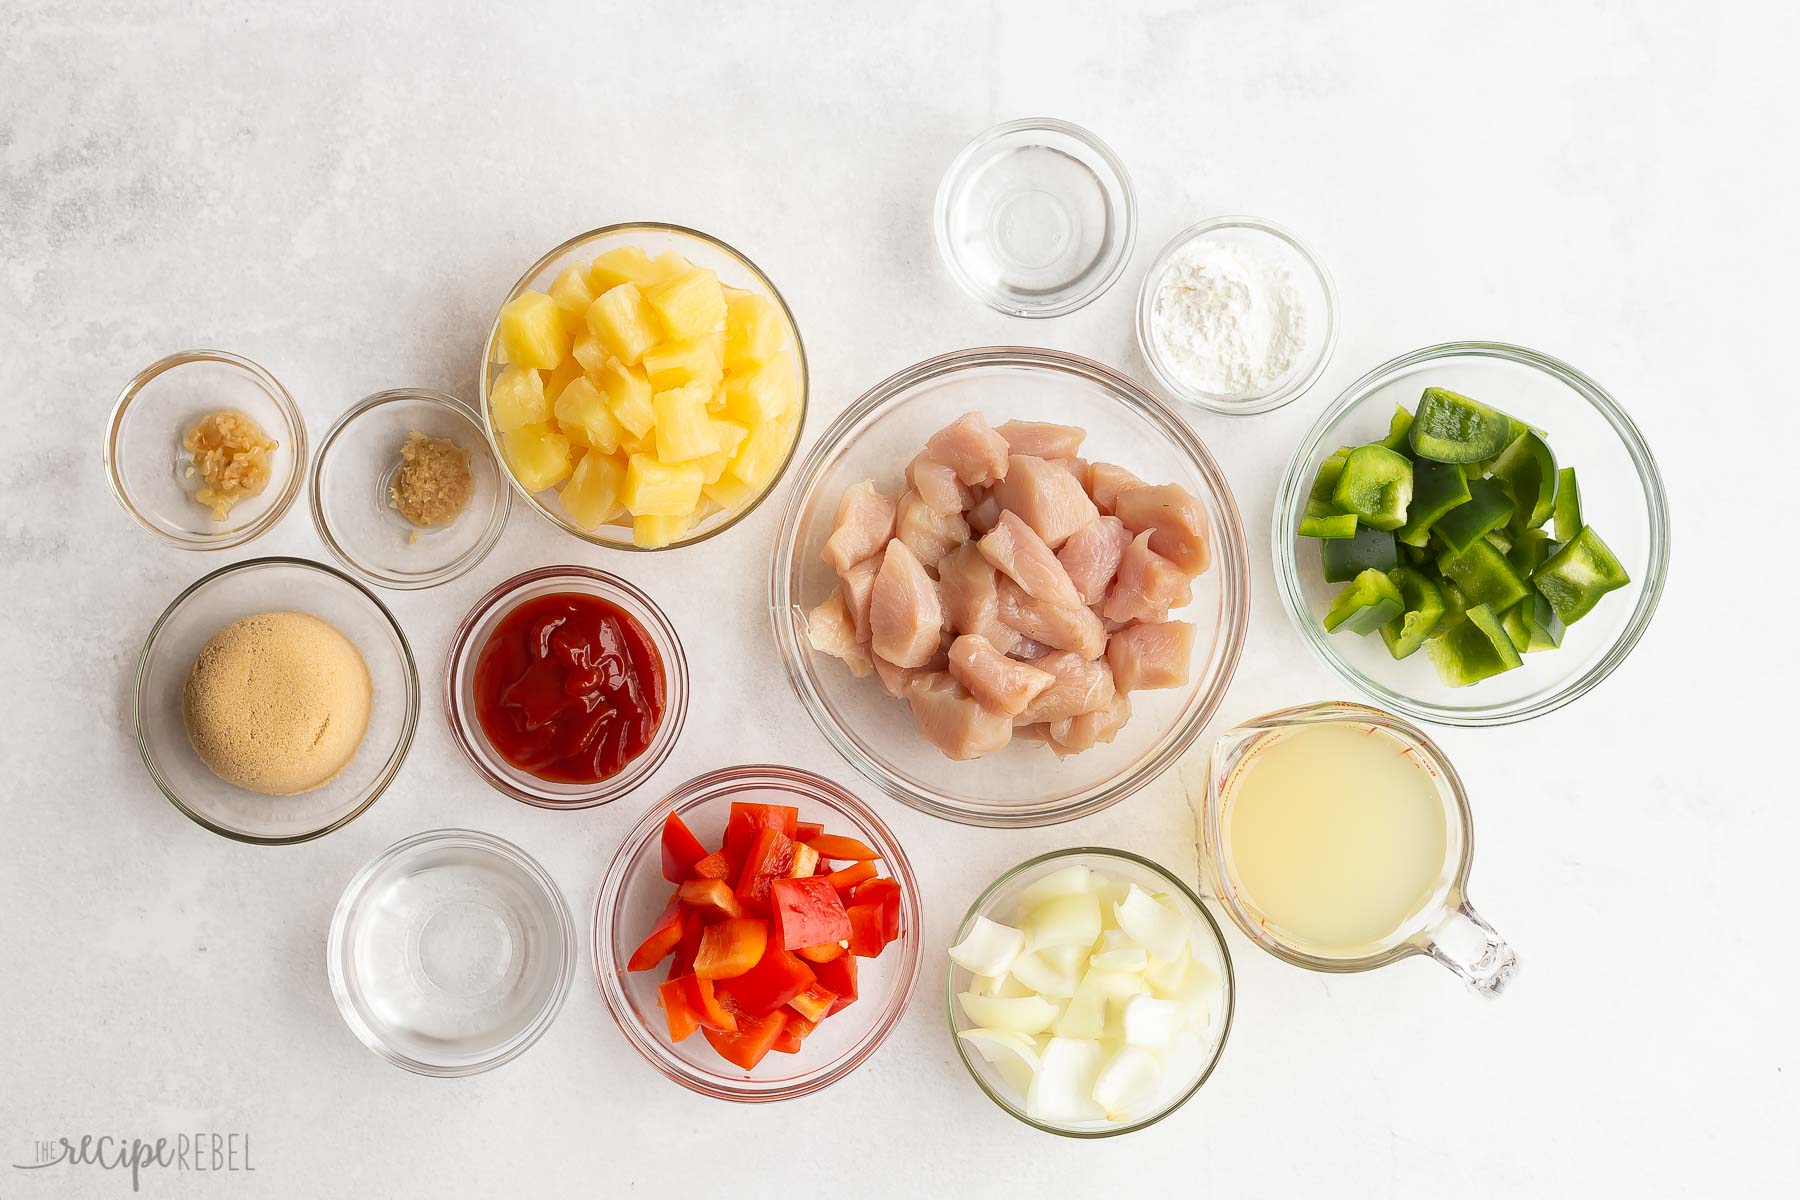 ingredients needed for sweet and sour chicken.